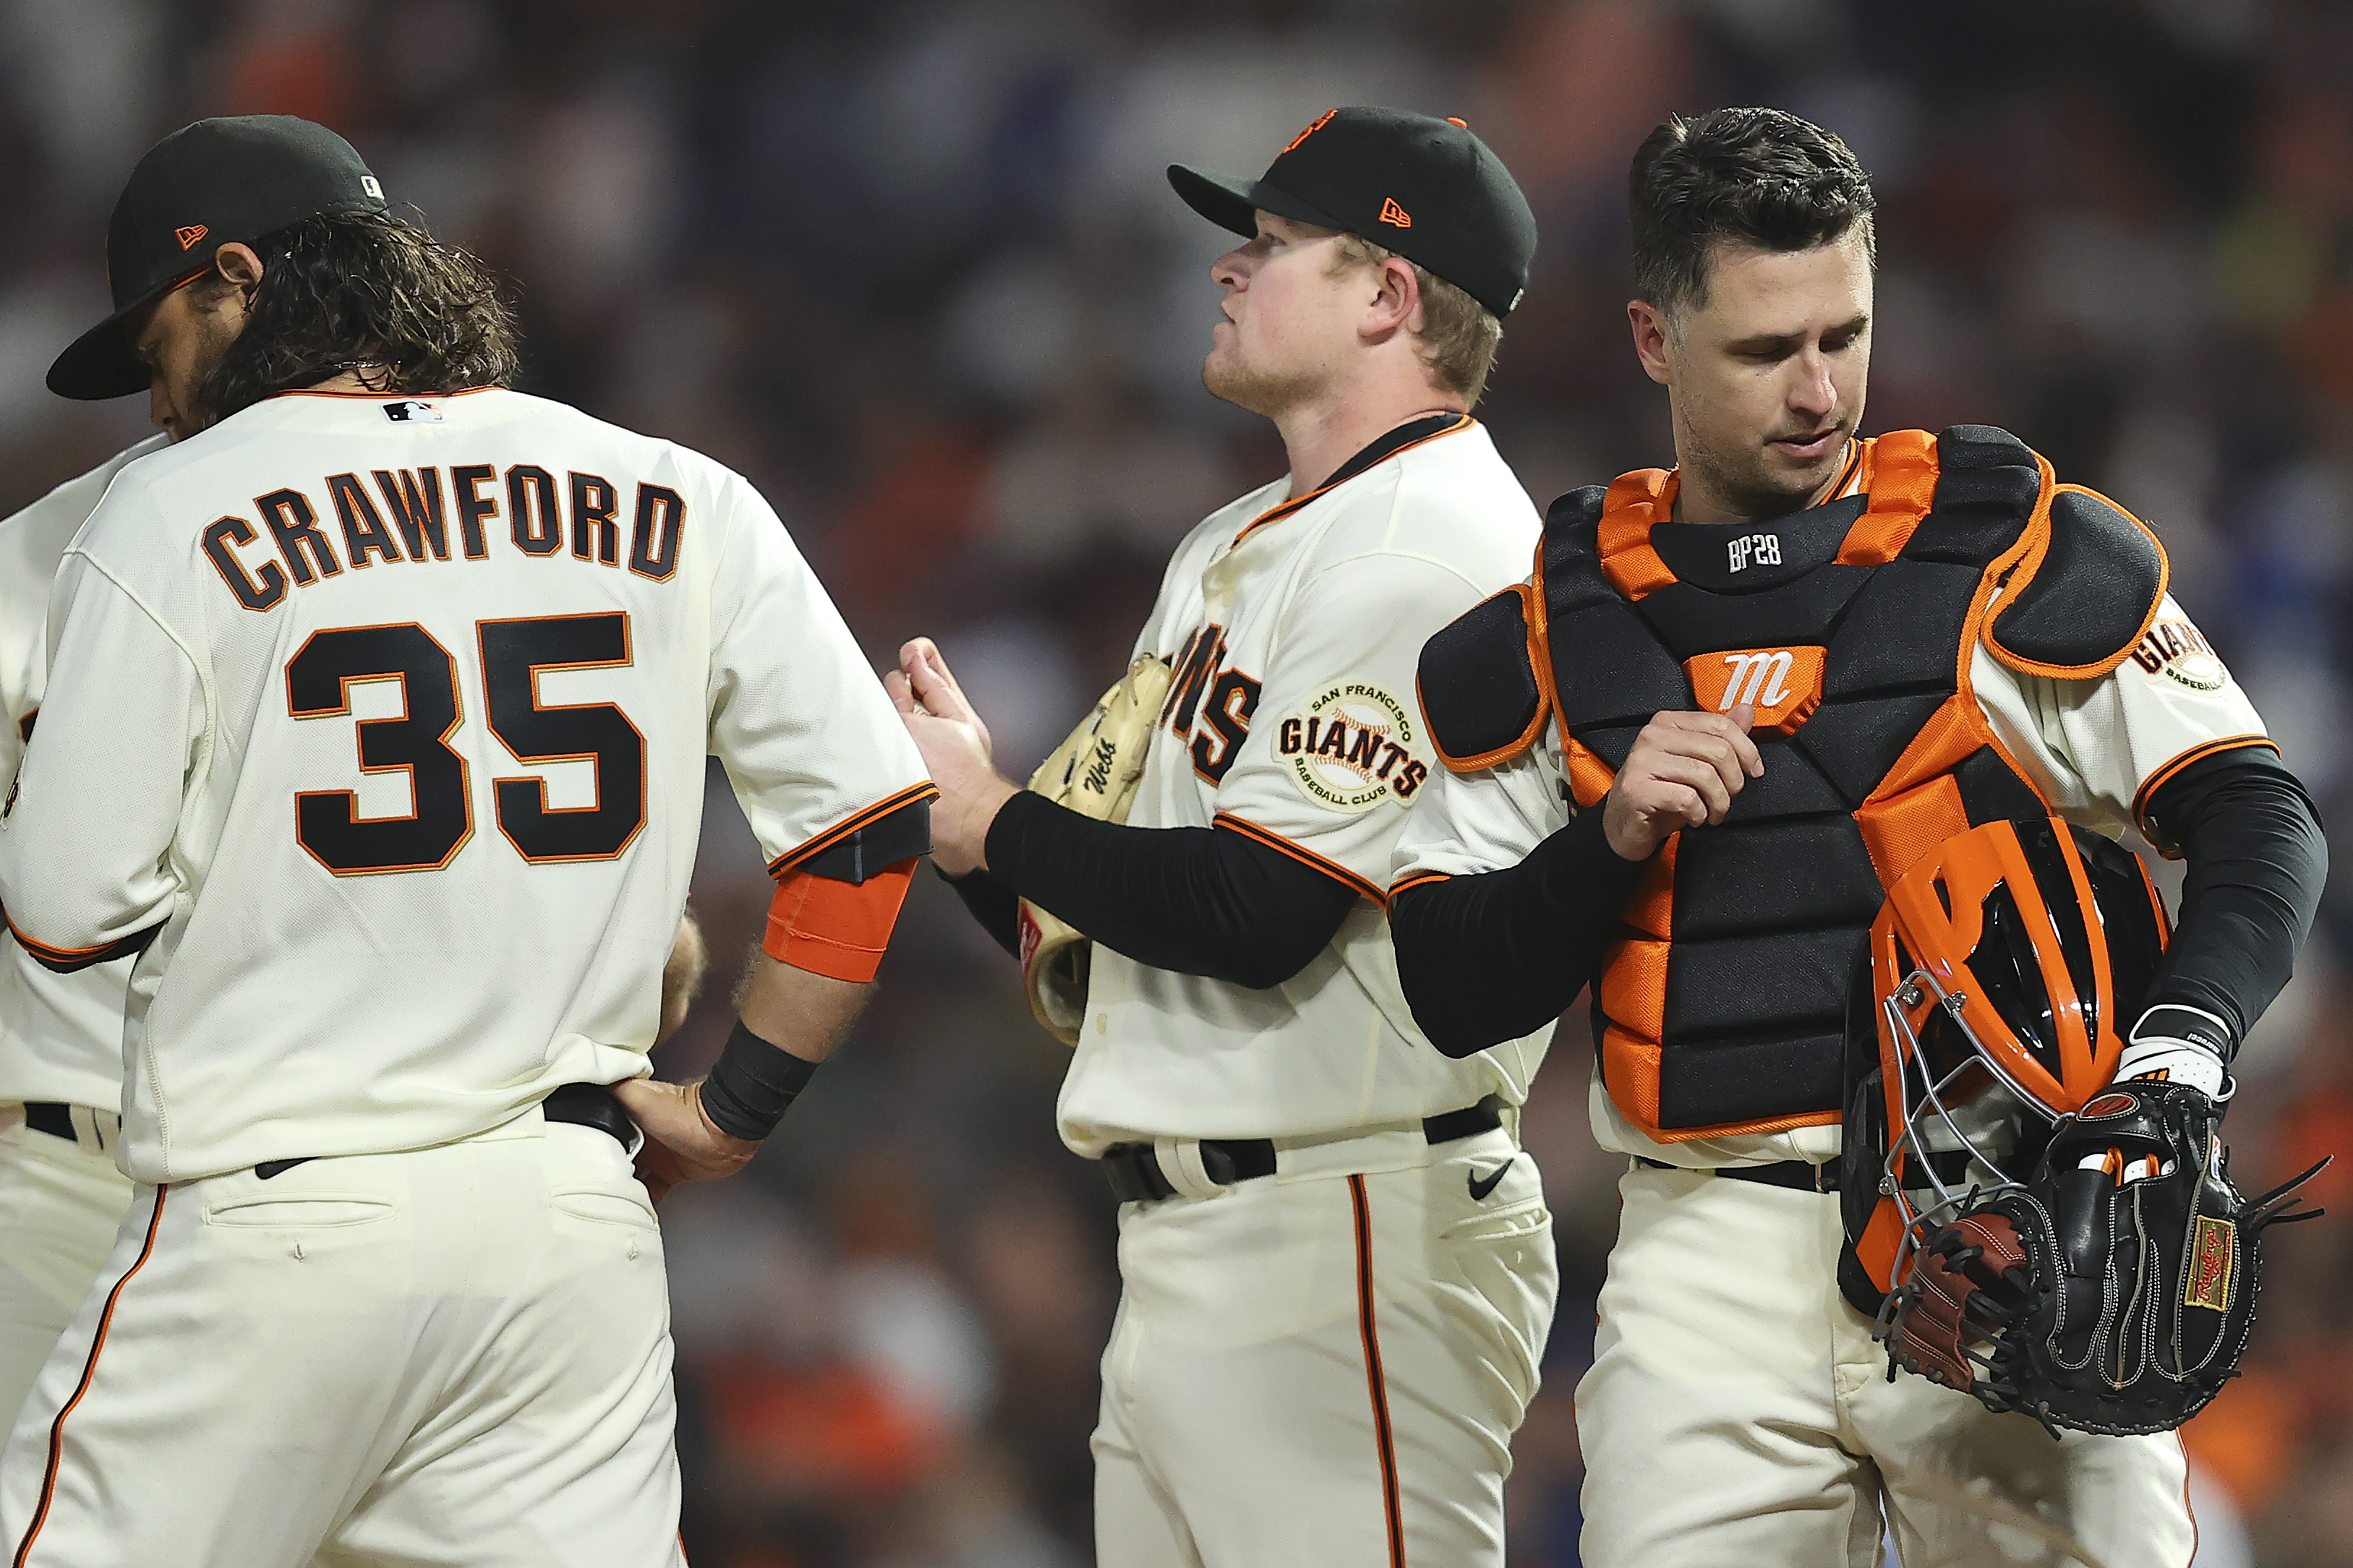 SF Giants lose a key reliever to injury, call up LaMonte Wade Jr